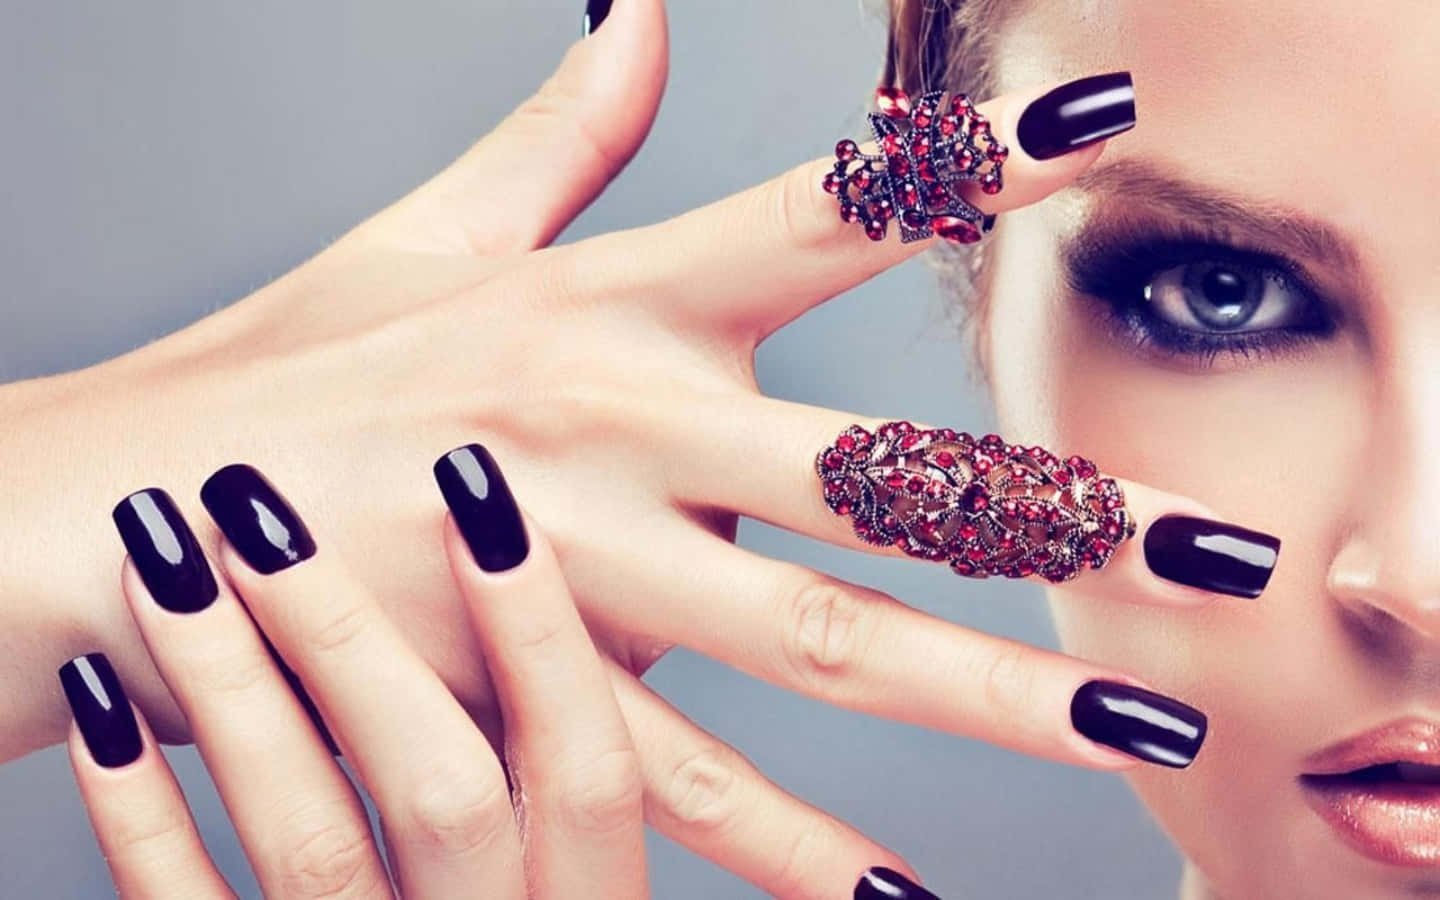 Shine Brightly with a Colorful Nail Manicure